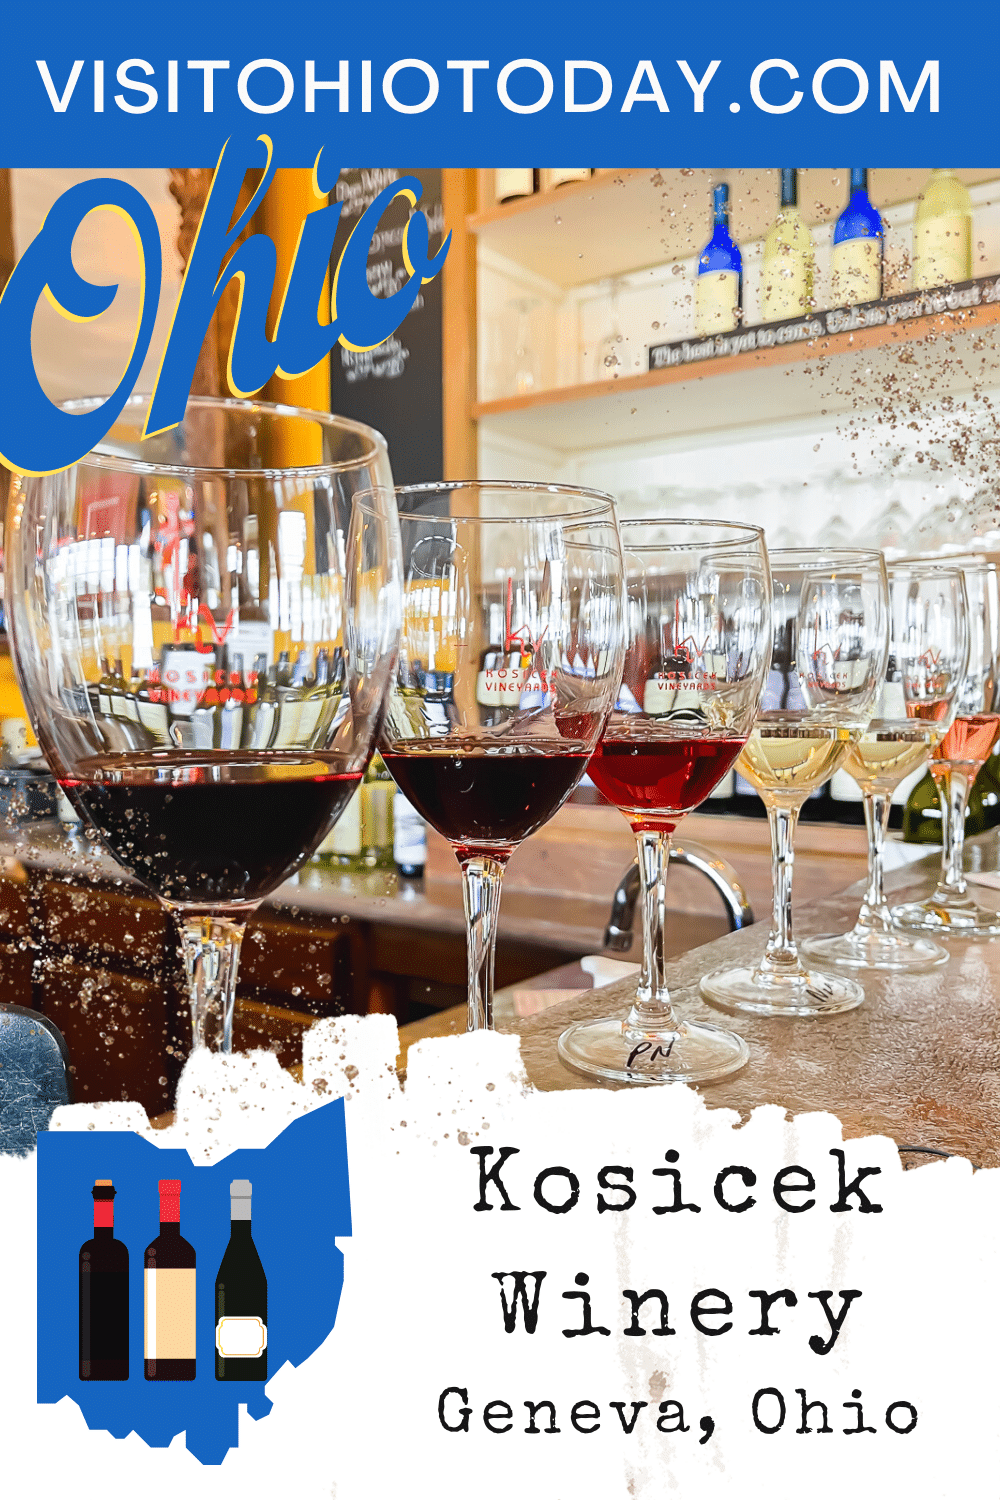 Kosicek Winery is a family winery located in Harpersfield, Ohio. Kosicek Winery. Kosicek Winery offers wine by the glass or bottle along with delicious homemade food items.  #ohiowines #ohio #ohiowinery #Kosicek #winery #grandrivervalley